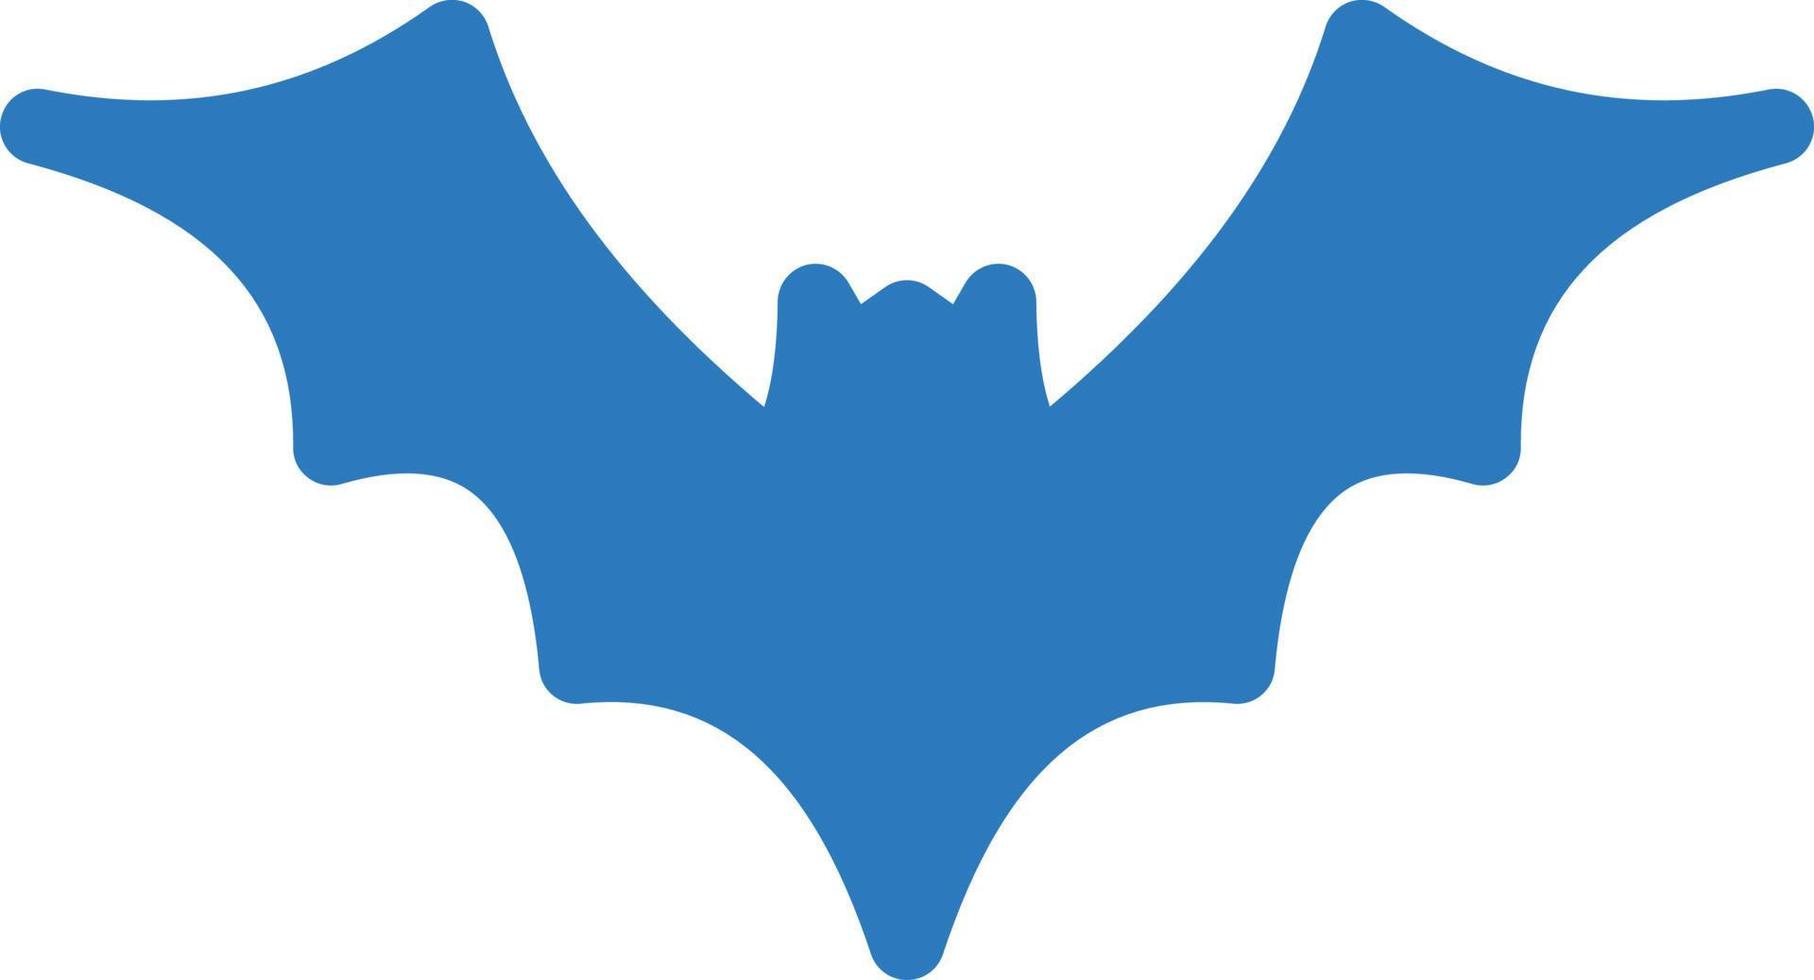 bat vector illustration on a background.Premium quality symbols.vector icons for concept and graphic design.